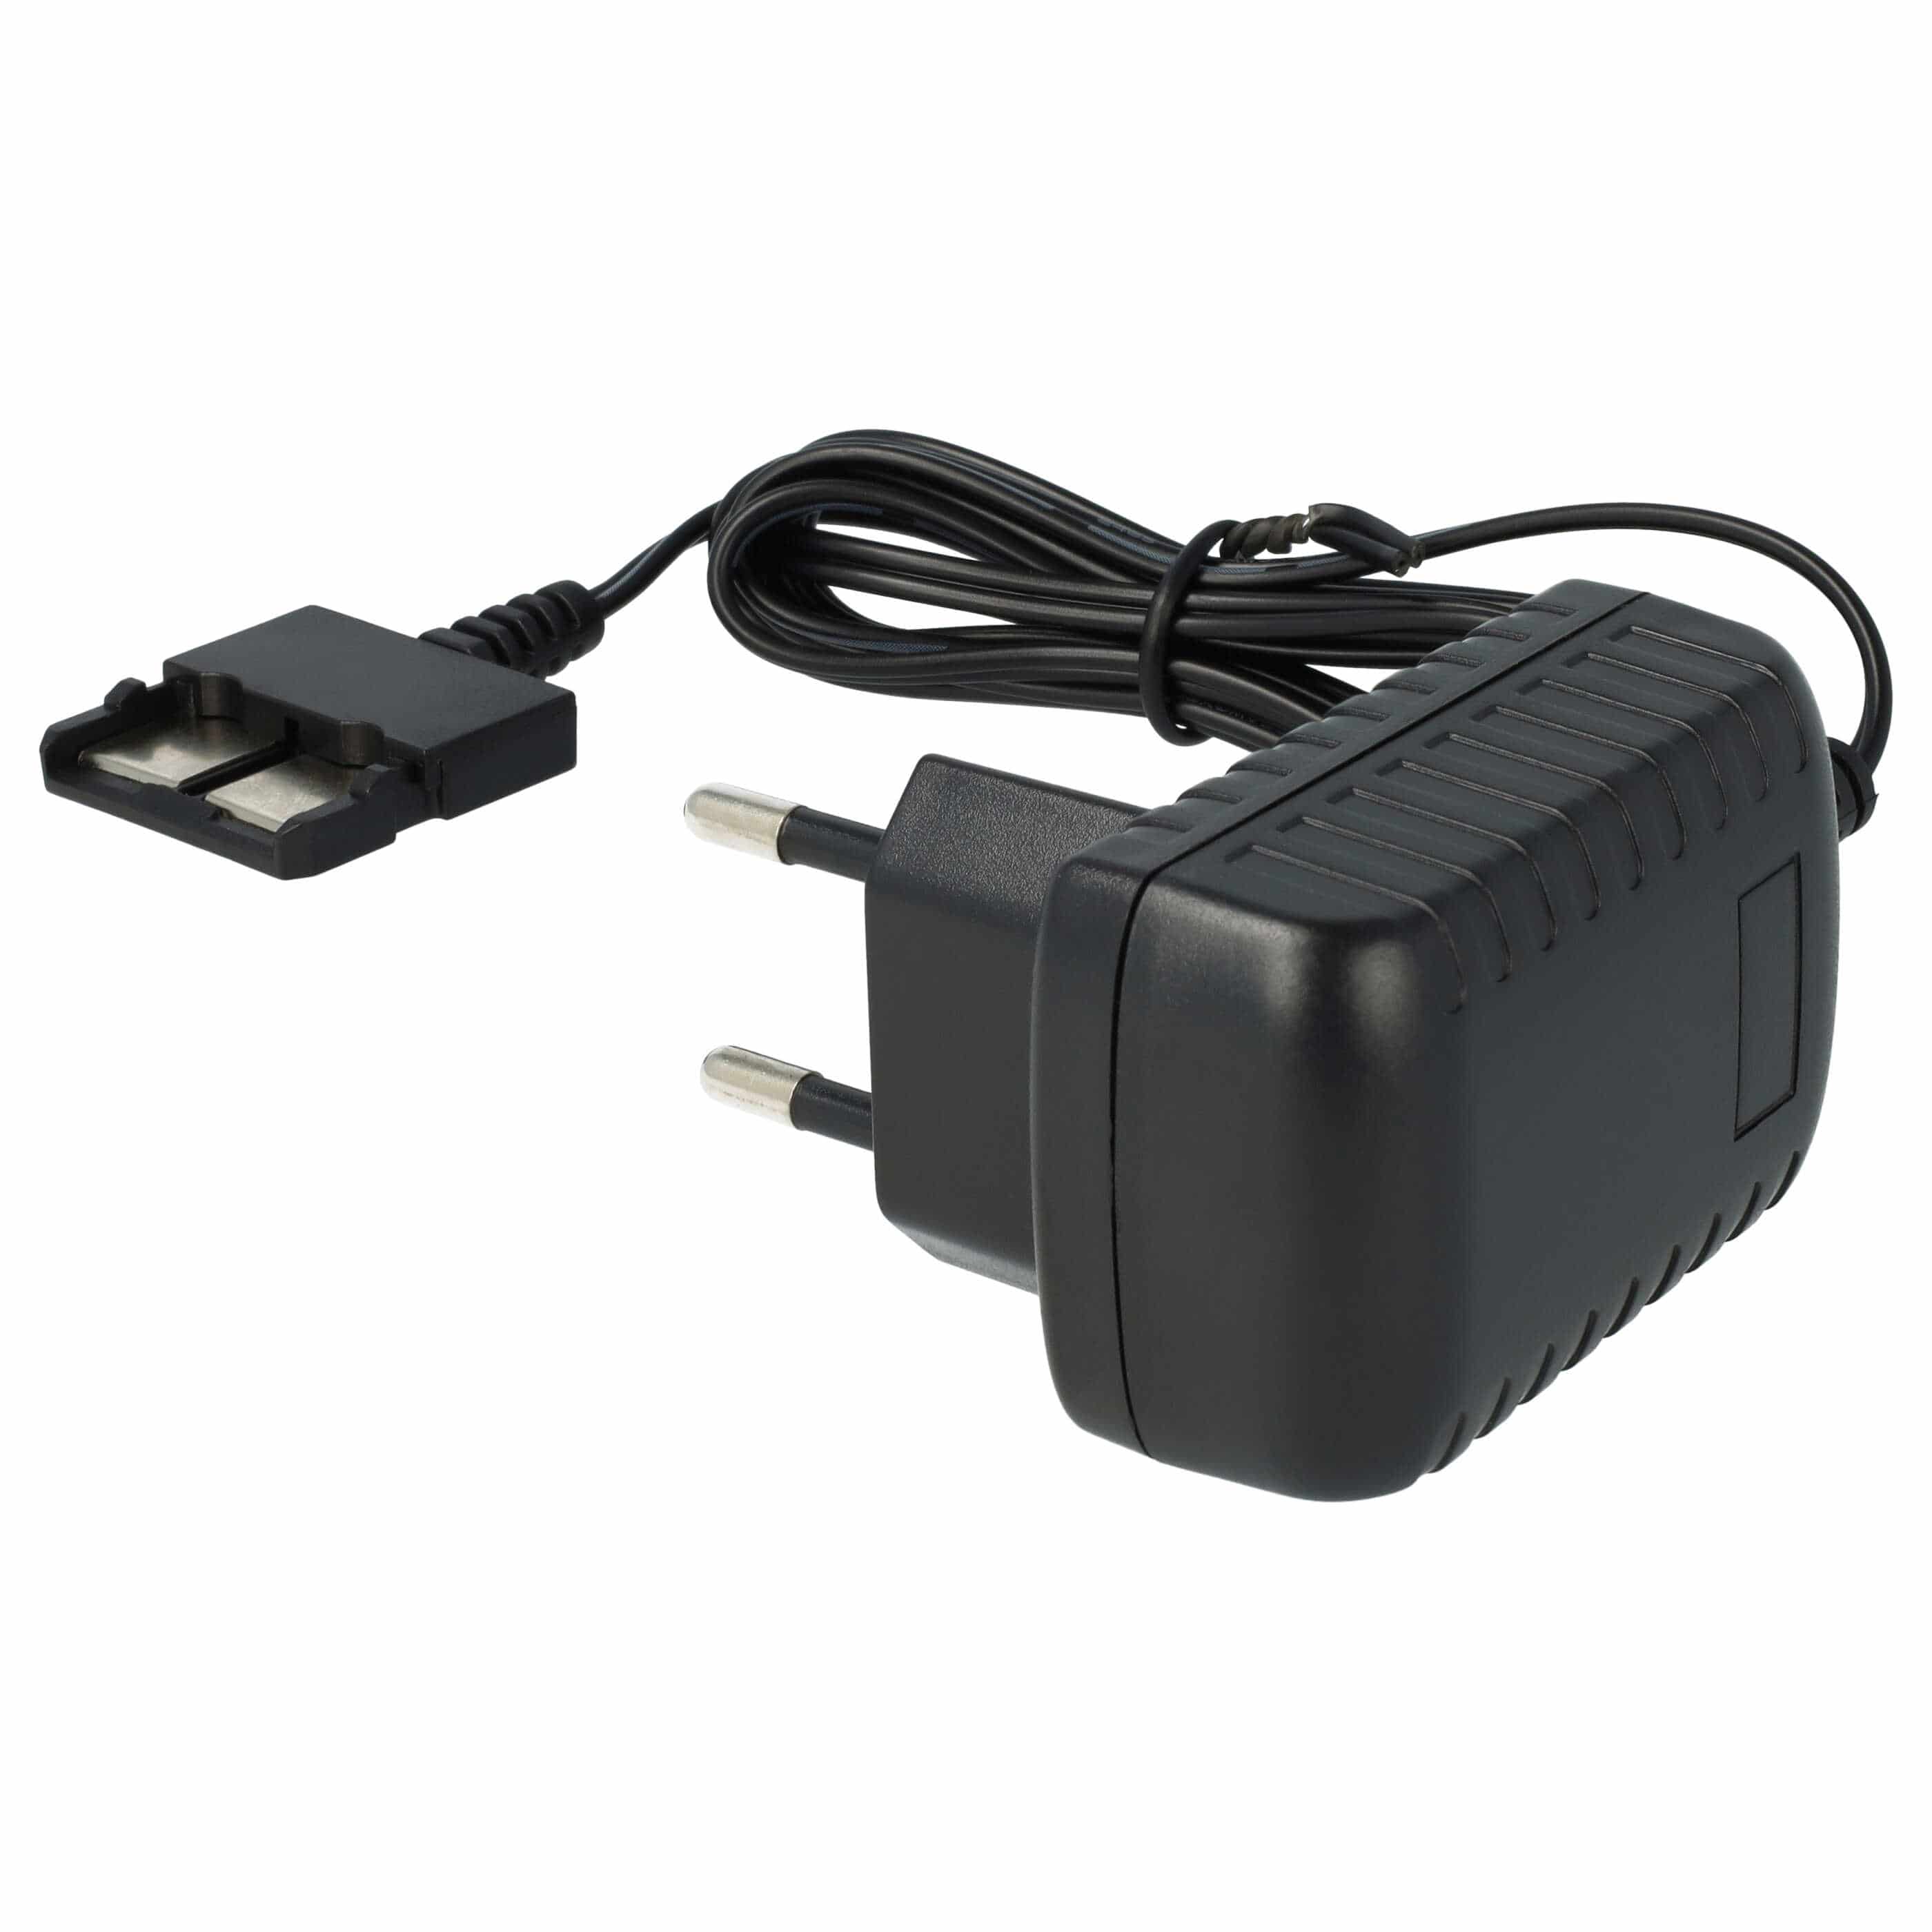 Mains Power Adapter replaces Gigaset C39280-Z4-C733 for Landline Telephone Charging Station - 150 cm